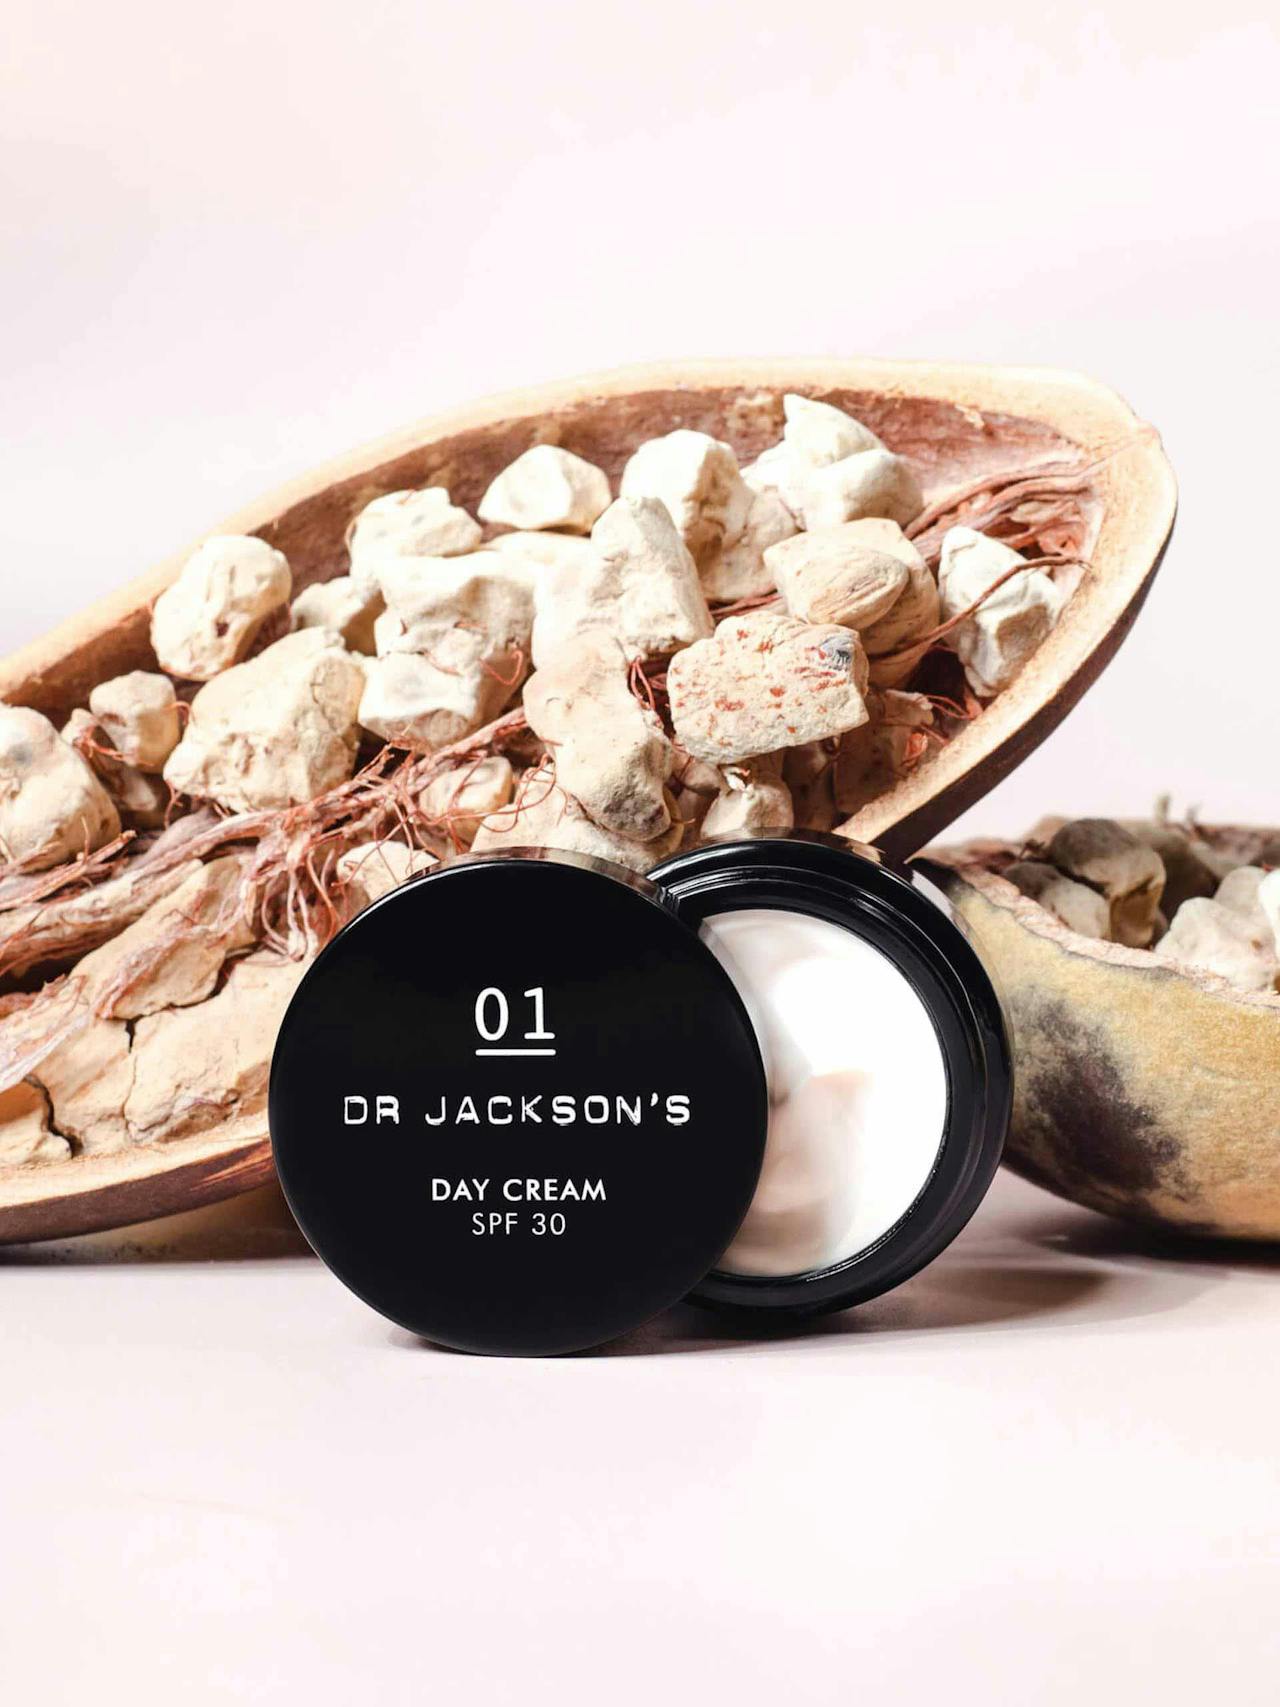 Discover Dr Jackson's Skincare on Collagerie. Shop the clean beauty brand with the finest natural ingredients for your skin routine. Fully vegan, science-led beauty products on Collagerie. Free Shipping & Free Returns to the UK | Collagerie.com